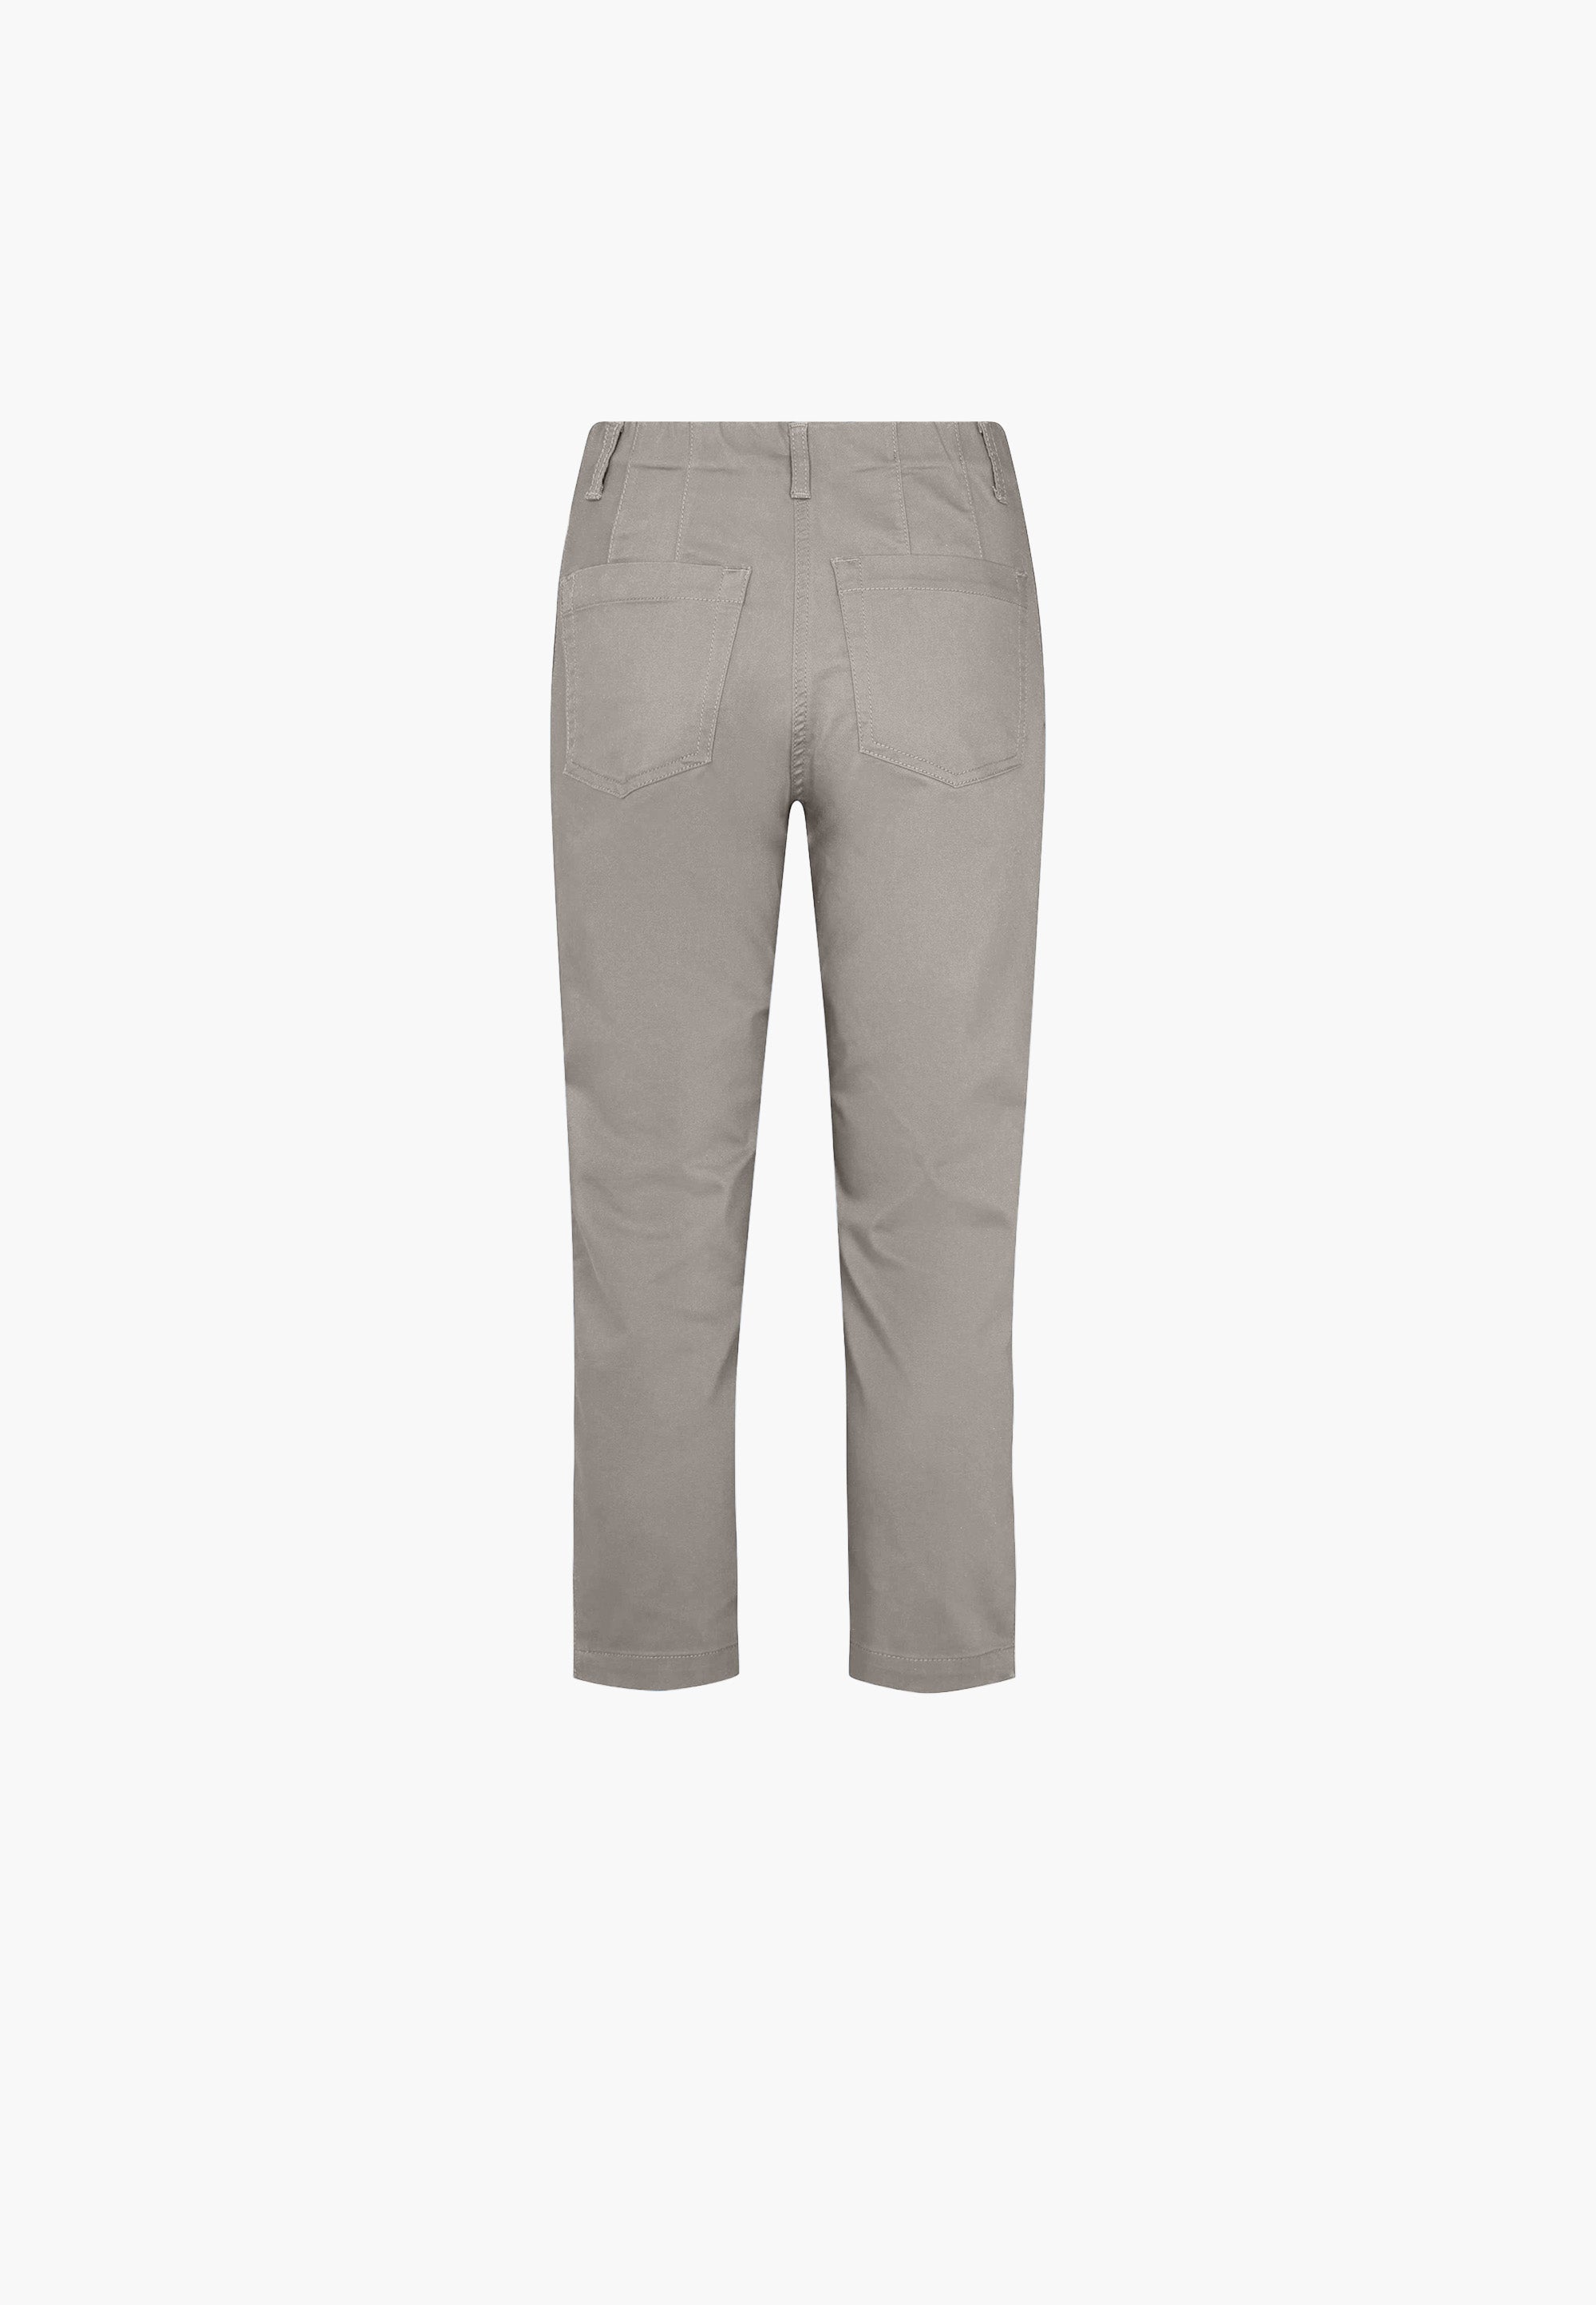 LAURIE Patricia Pure Regular Crop Trousers REGULAR 25000 Grey Sand